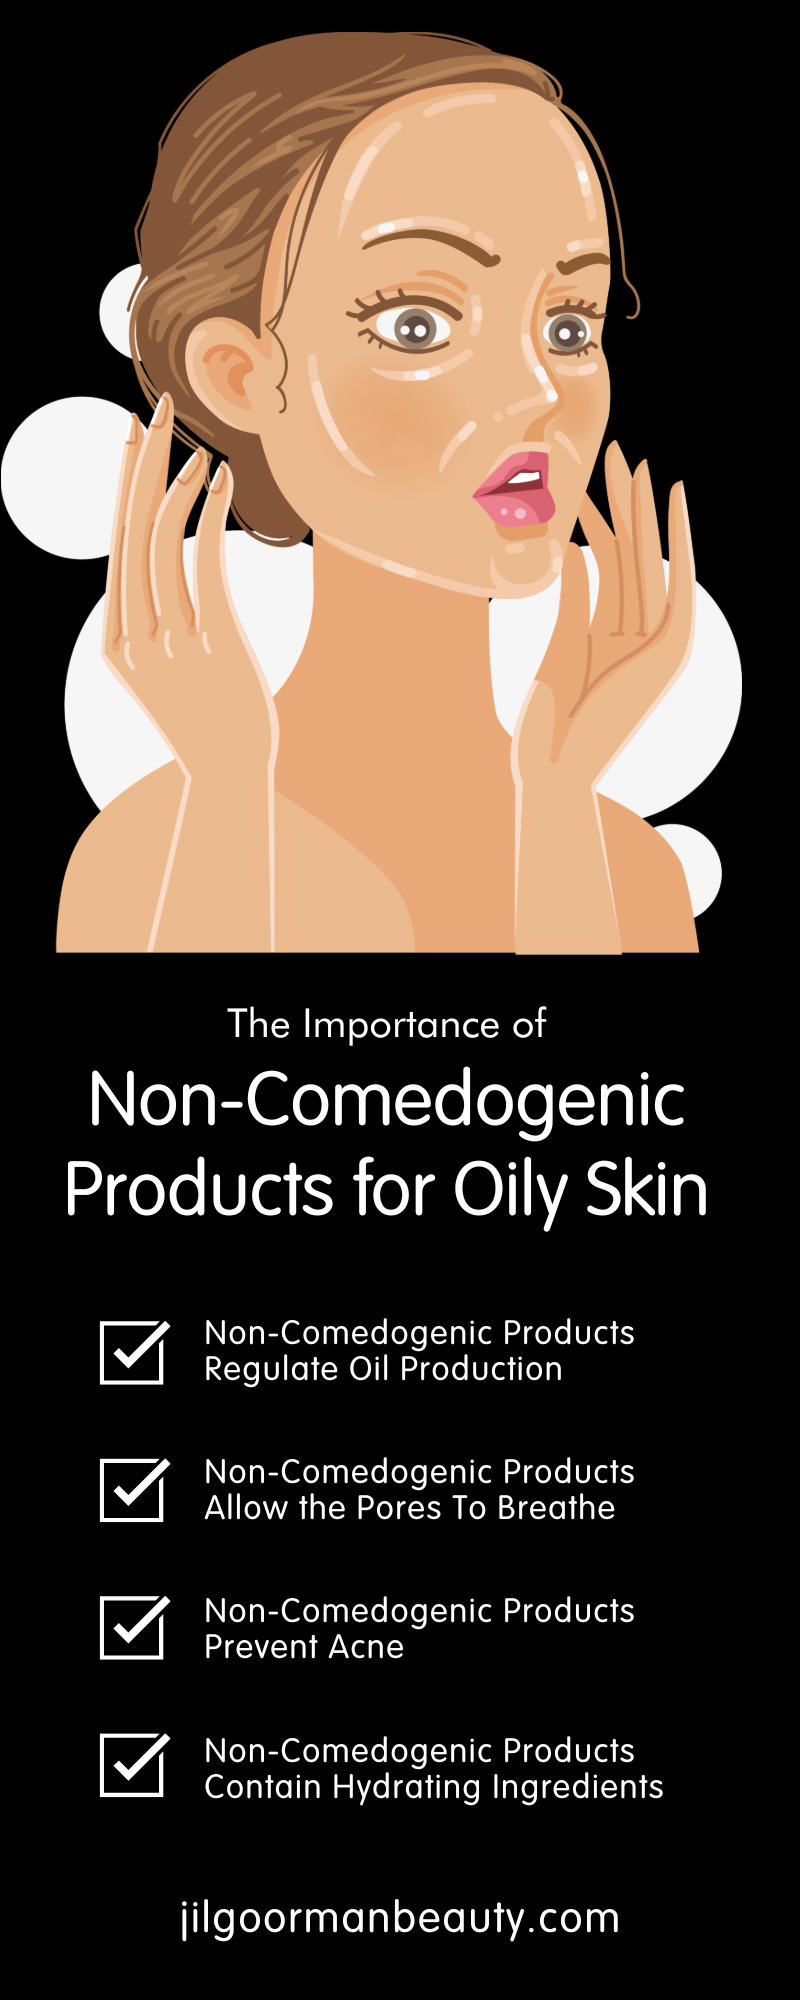 The Importance of Non-Comedogenic Products for Oily Skin